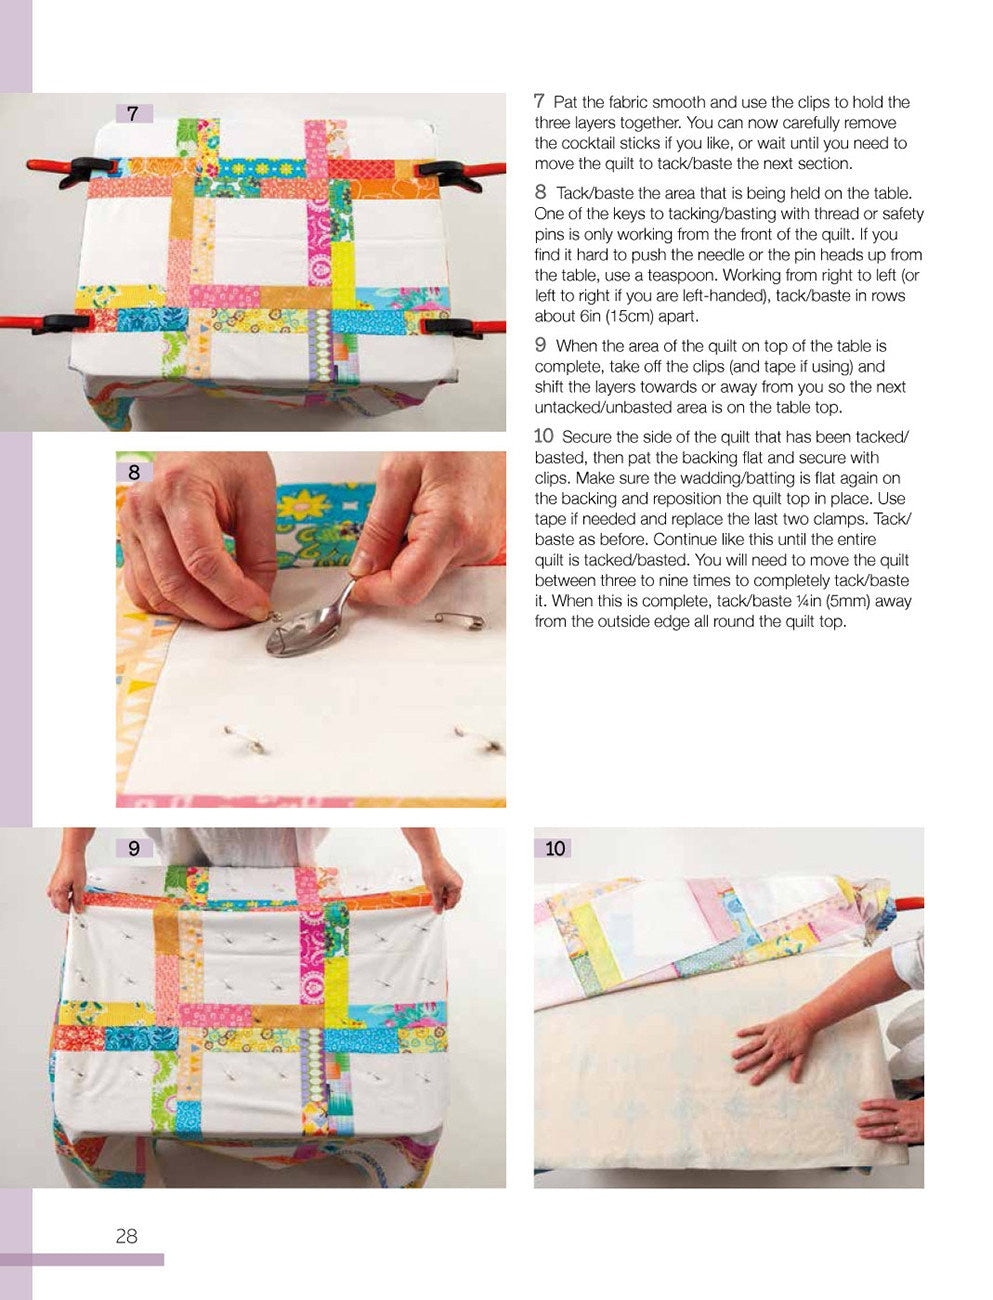 Big Stitch Quilting Pattern Booklet - Carolyn Forster - Search Press - 20 Projects, Templets Included